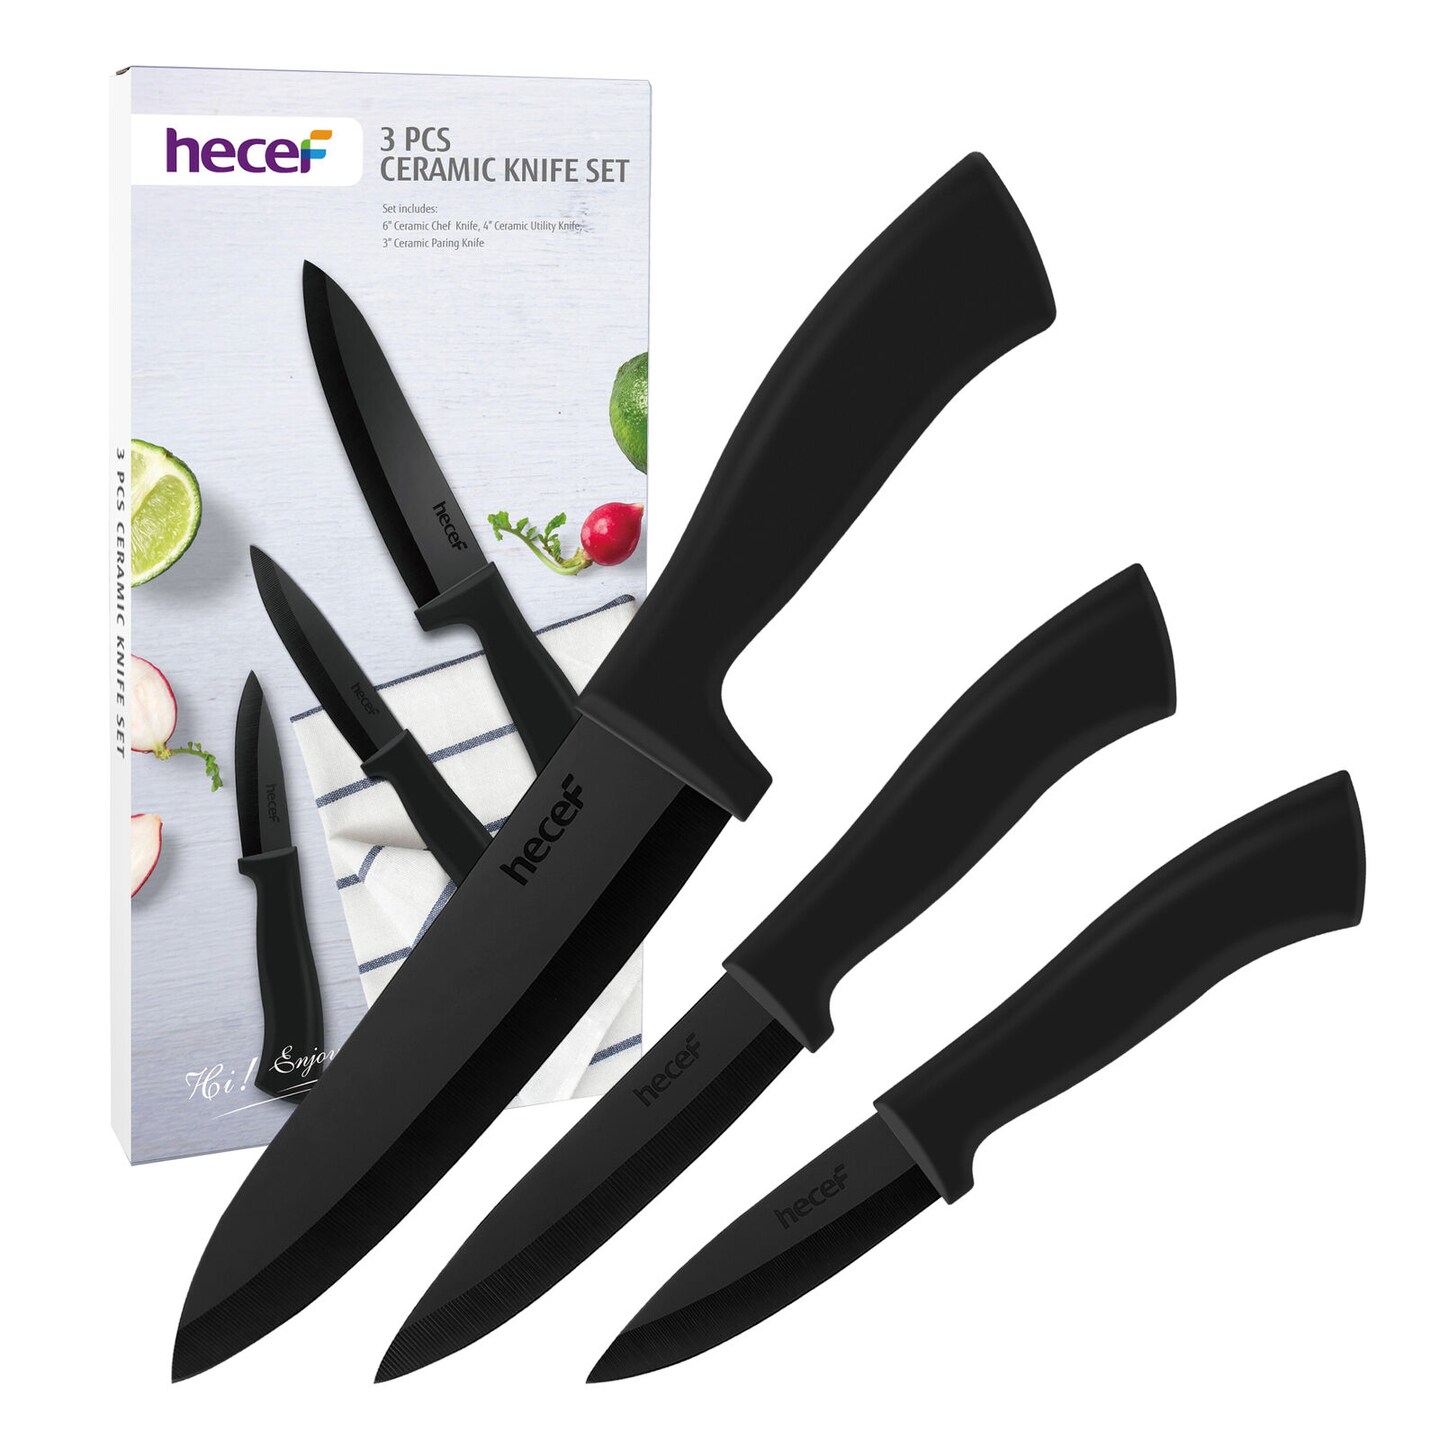 KitchenAid Classic 3 piece Chef Knife Set with Custom Fit Blade Covers, 8  inch Chef Knife, 5.5 inch Serrated Utility Knife, 3.5 inch Paring Knife